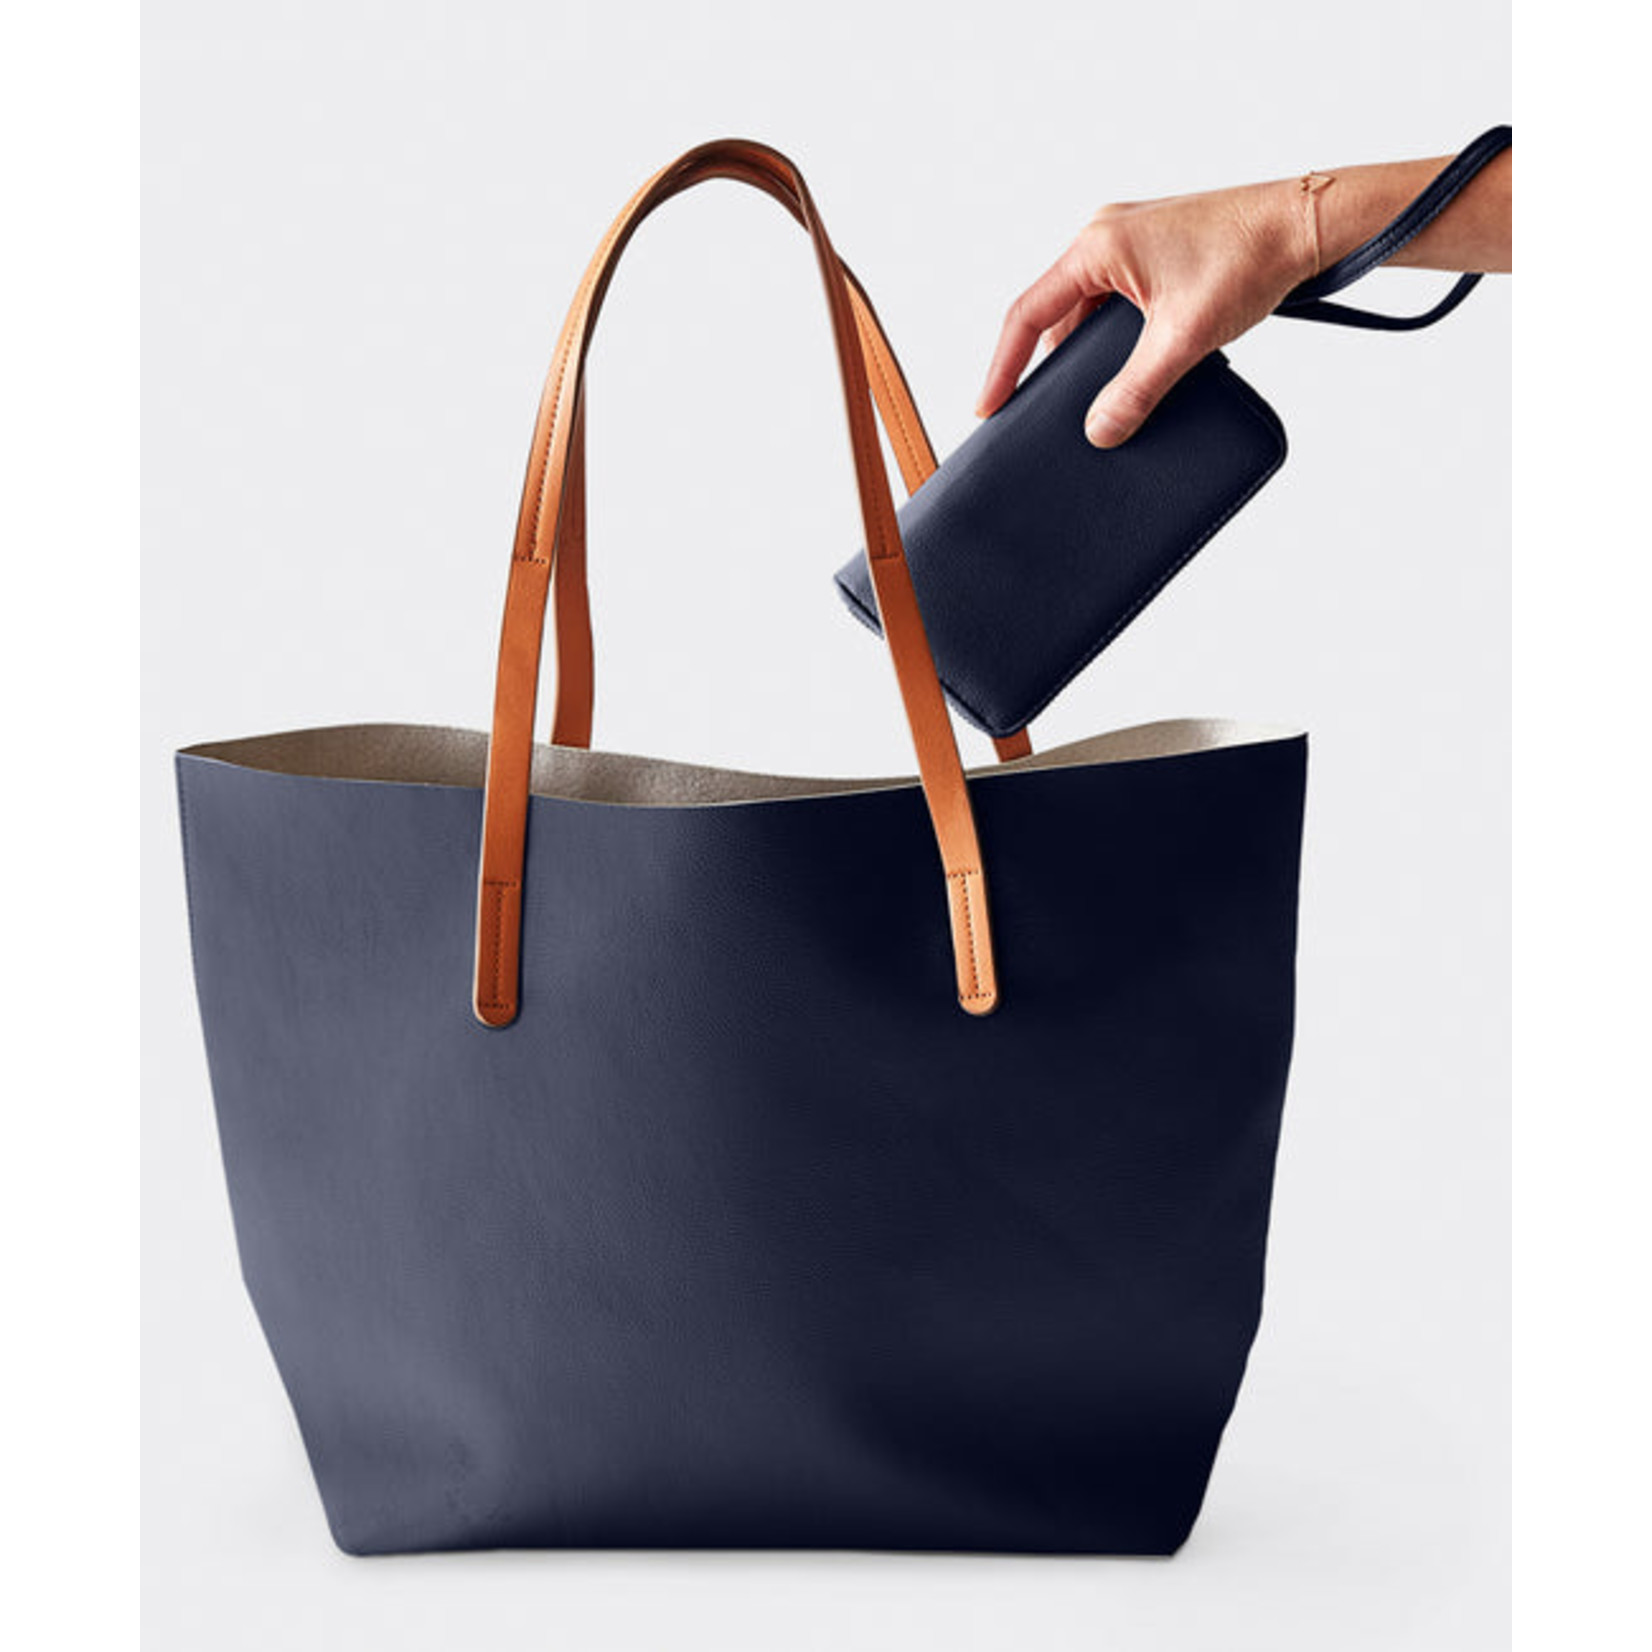 Boon Supply Vegan Leather Tote Navy